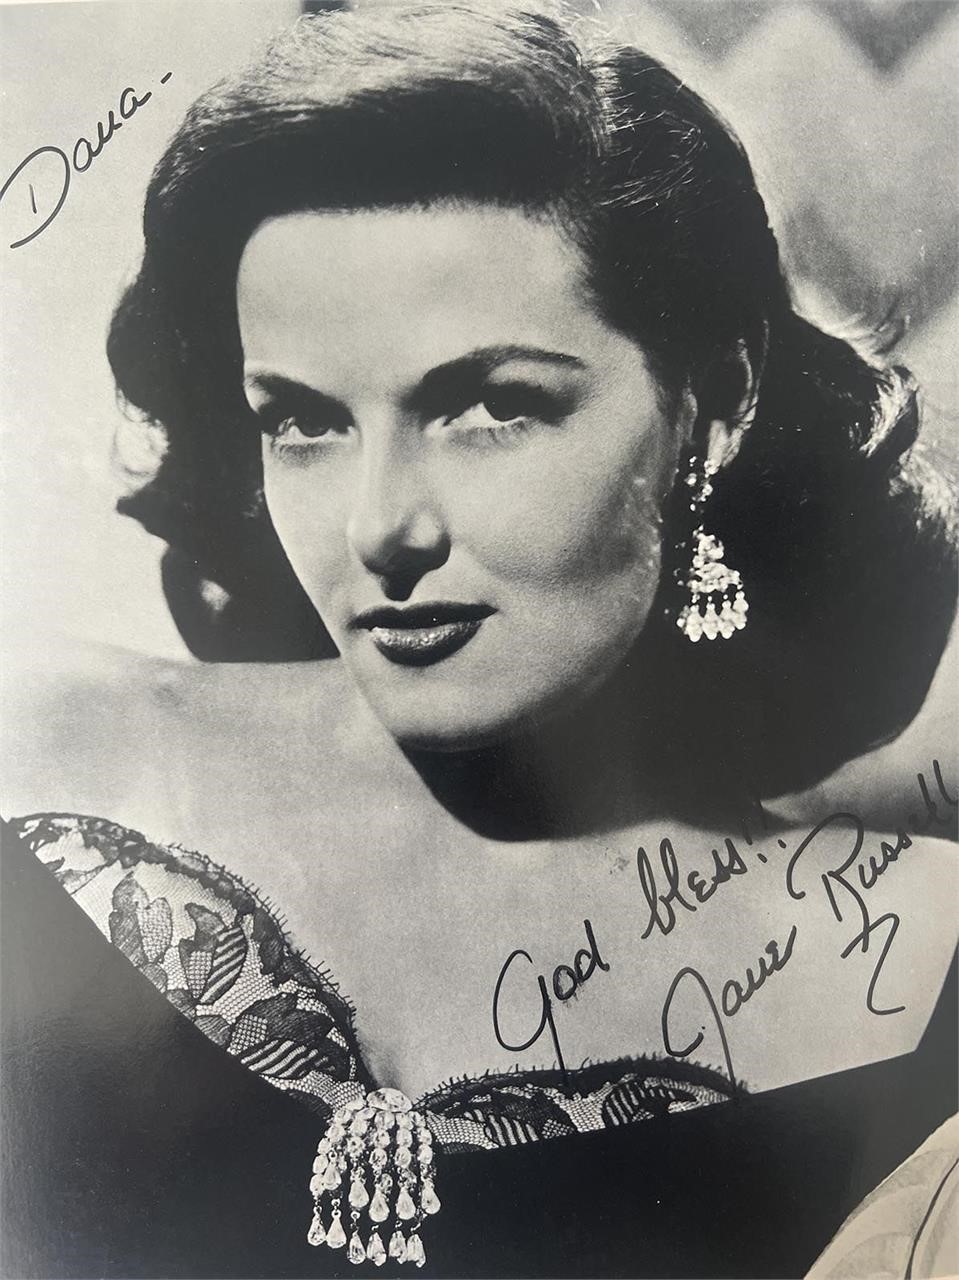 Jane Russell signed photo